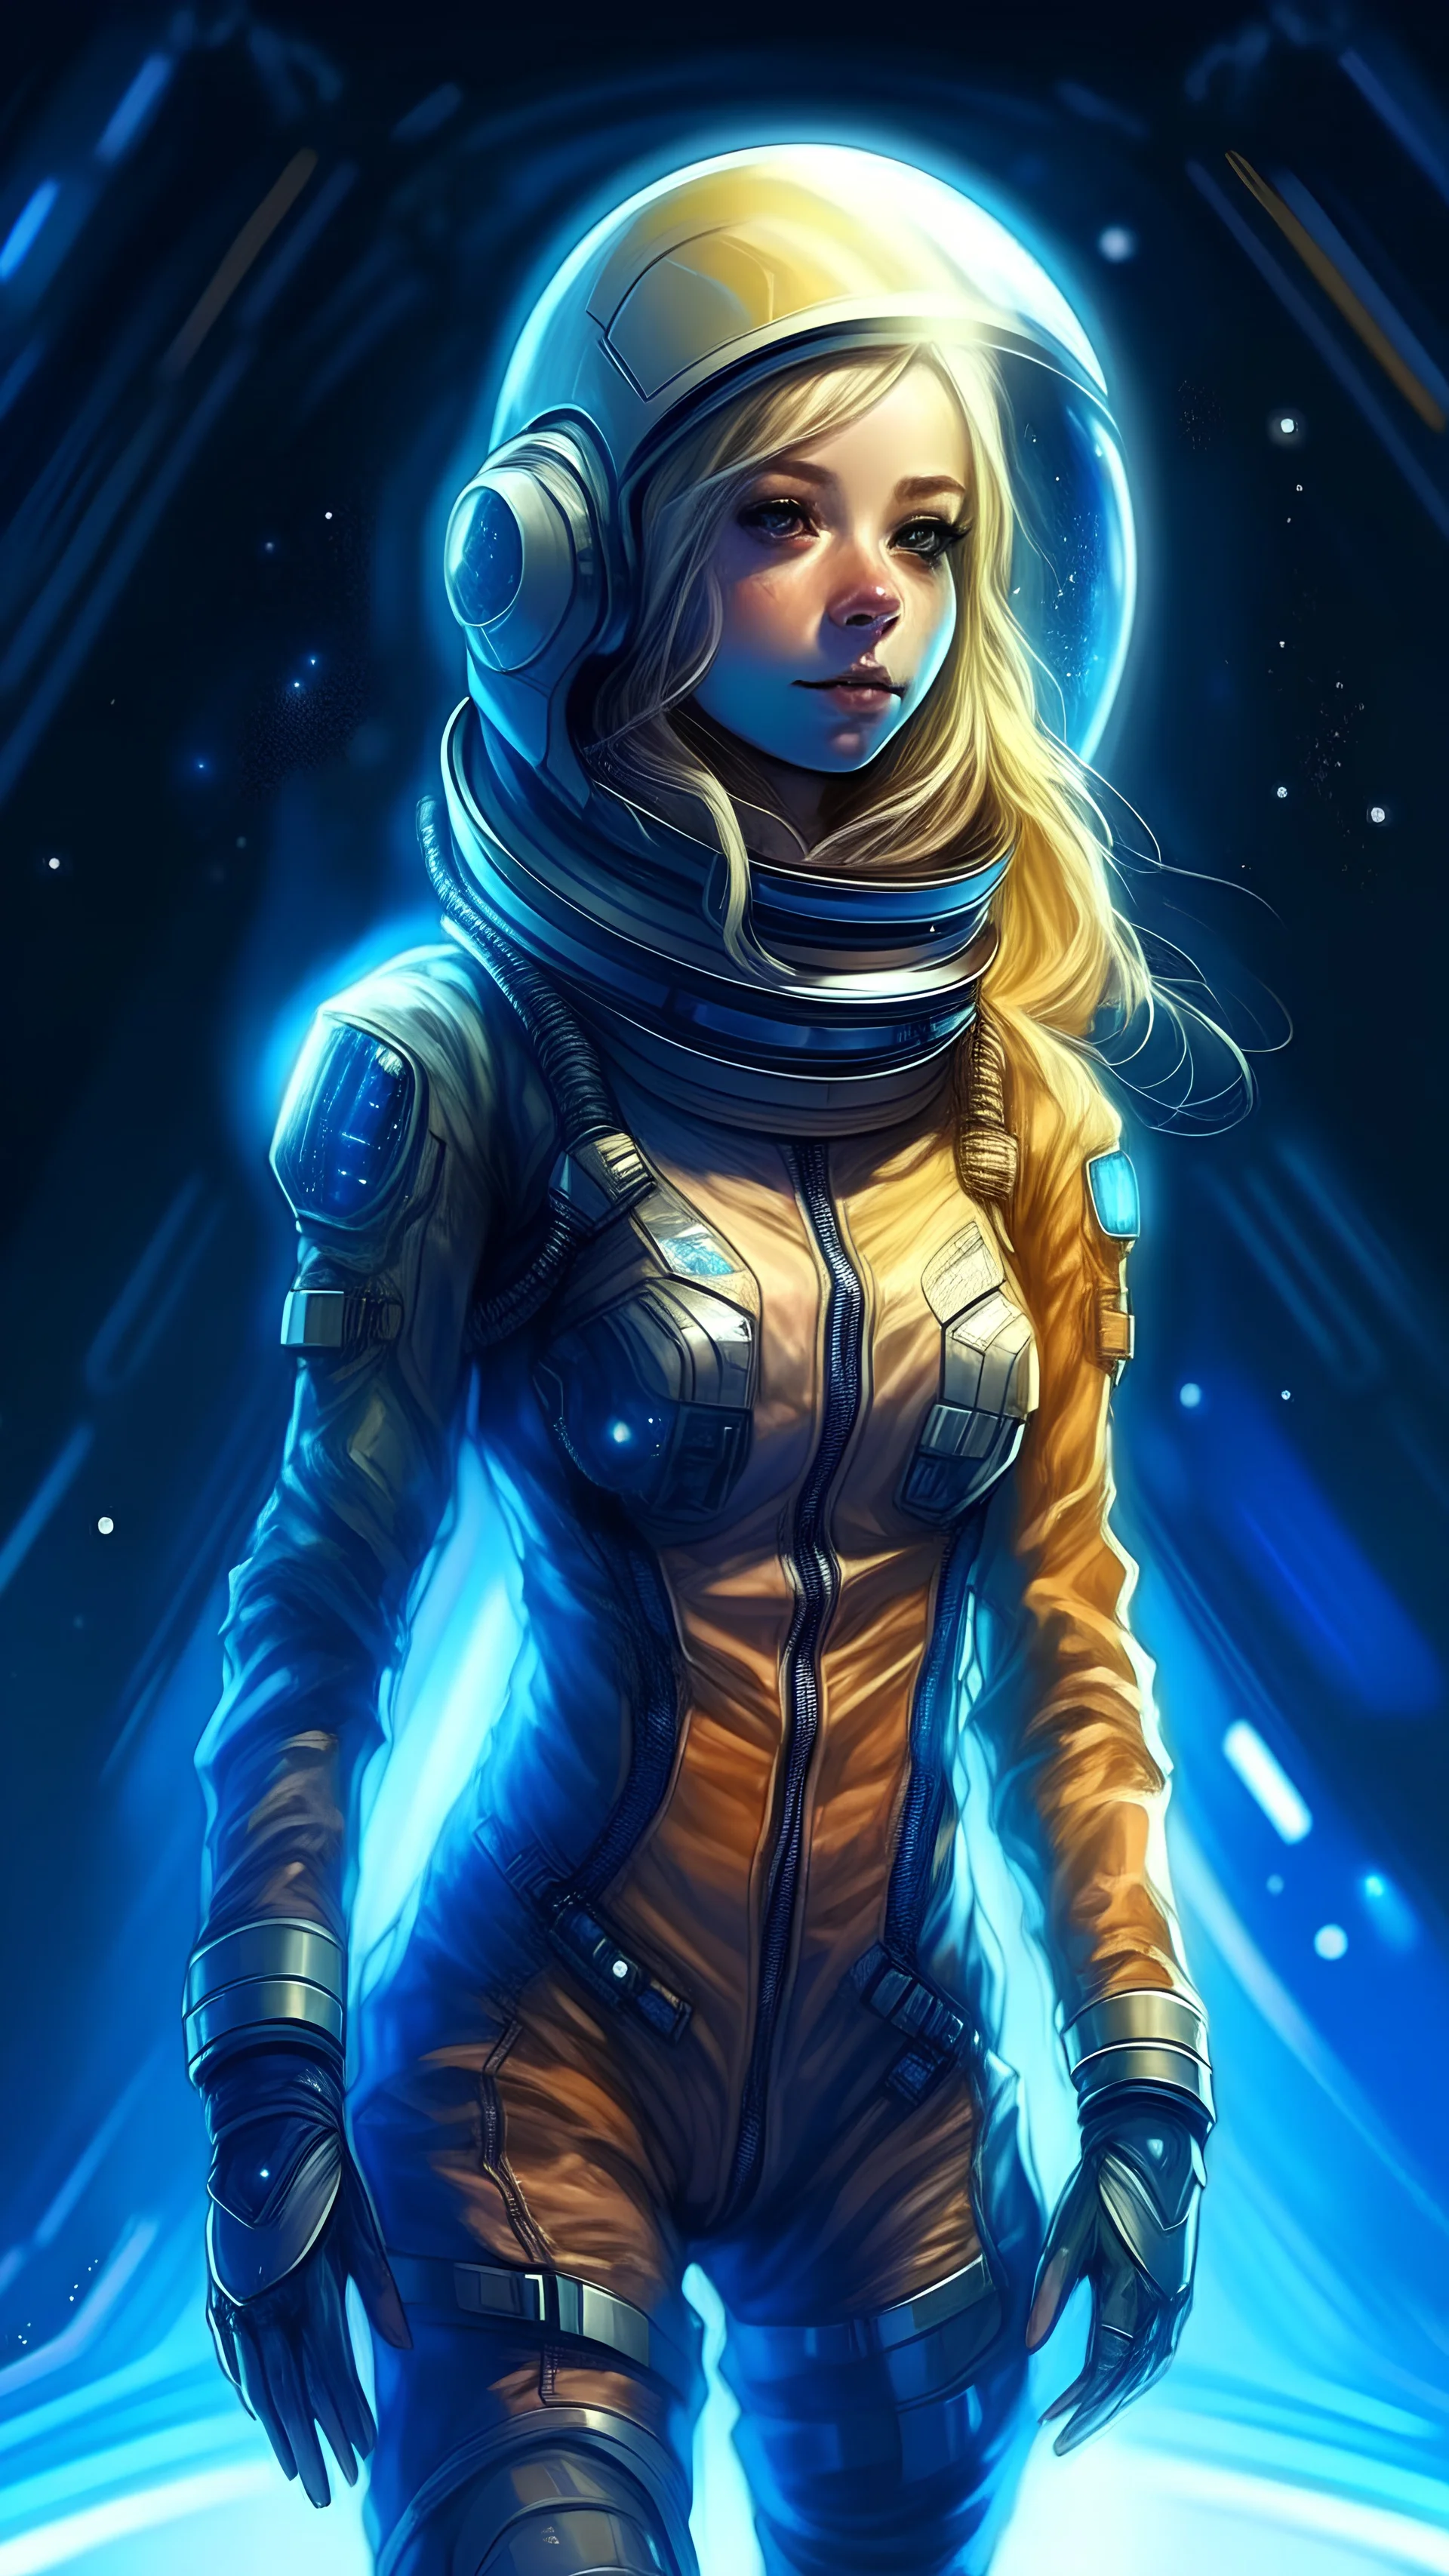 full body view, a woman in a space suit with a helmet on, armored astronaut girl, portrait anime space cadet girl, beautiful woman in spacesuit, girl in space, blonde girl in a cosmic dress, in spacesuit, futuristic astronaut, portrait beautiful sci - fi girl, glowwave girl portrait, scifi woman, wearing futuristic space gear, jen bartel, glowing spacesuit, pink